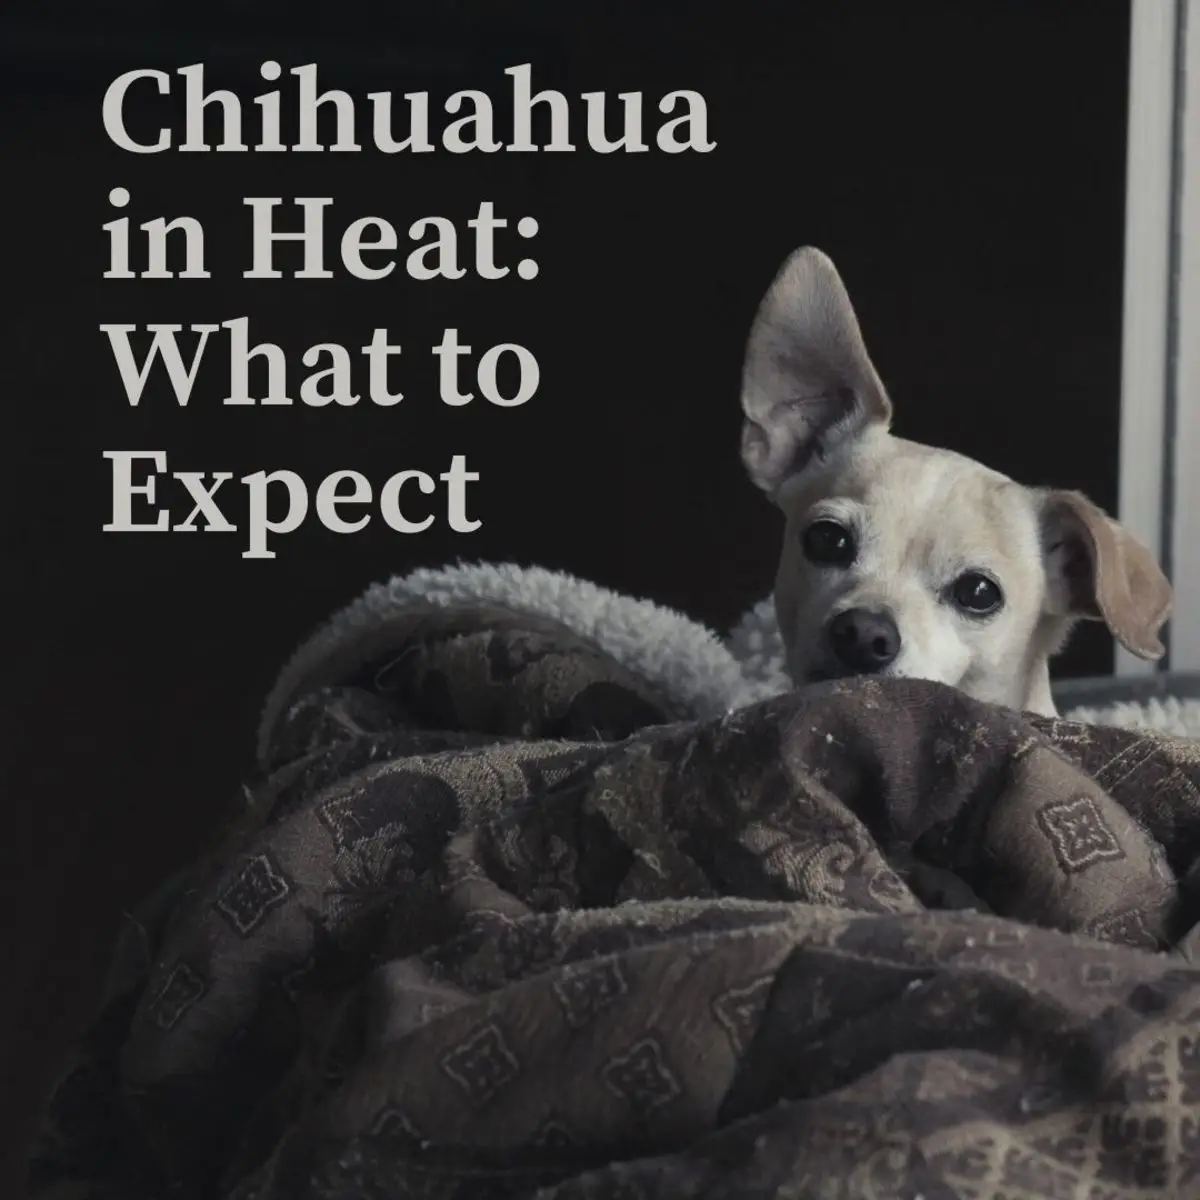 All about the Chihuahua heat cycle and what to expect